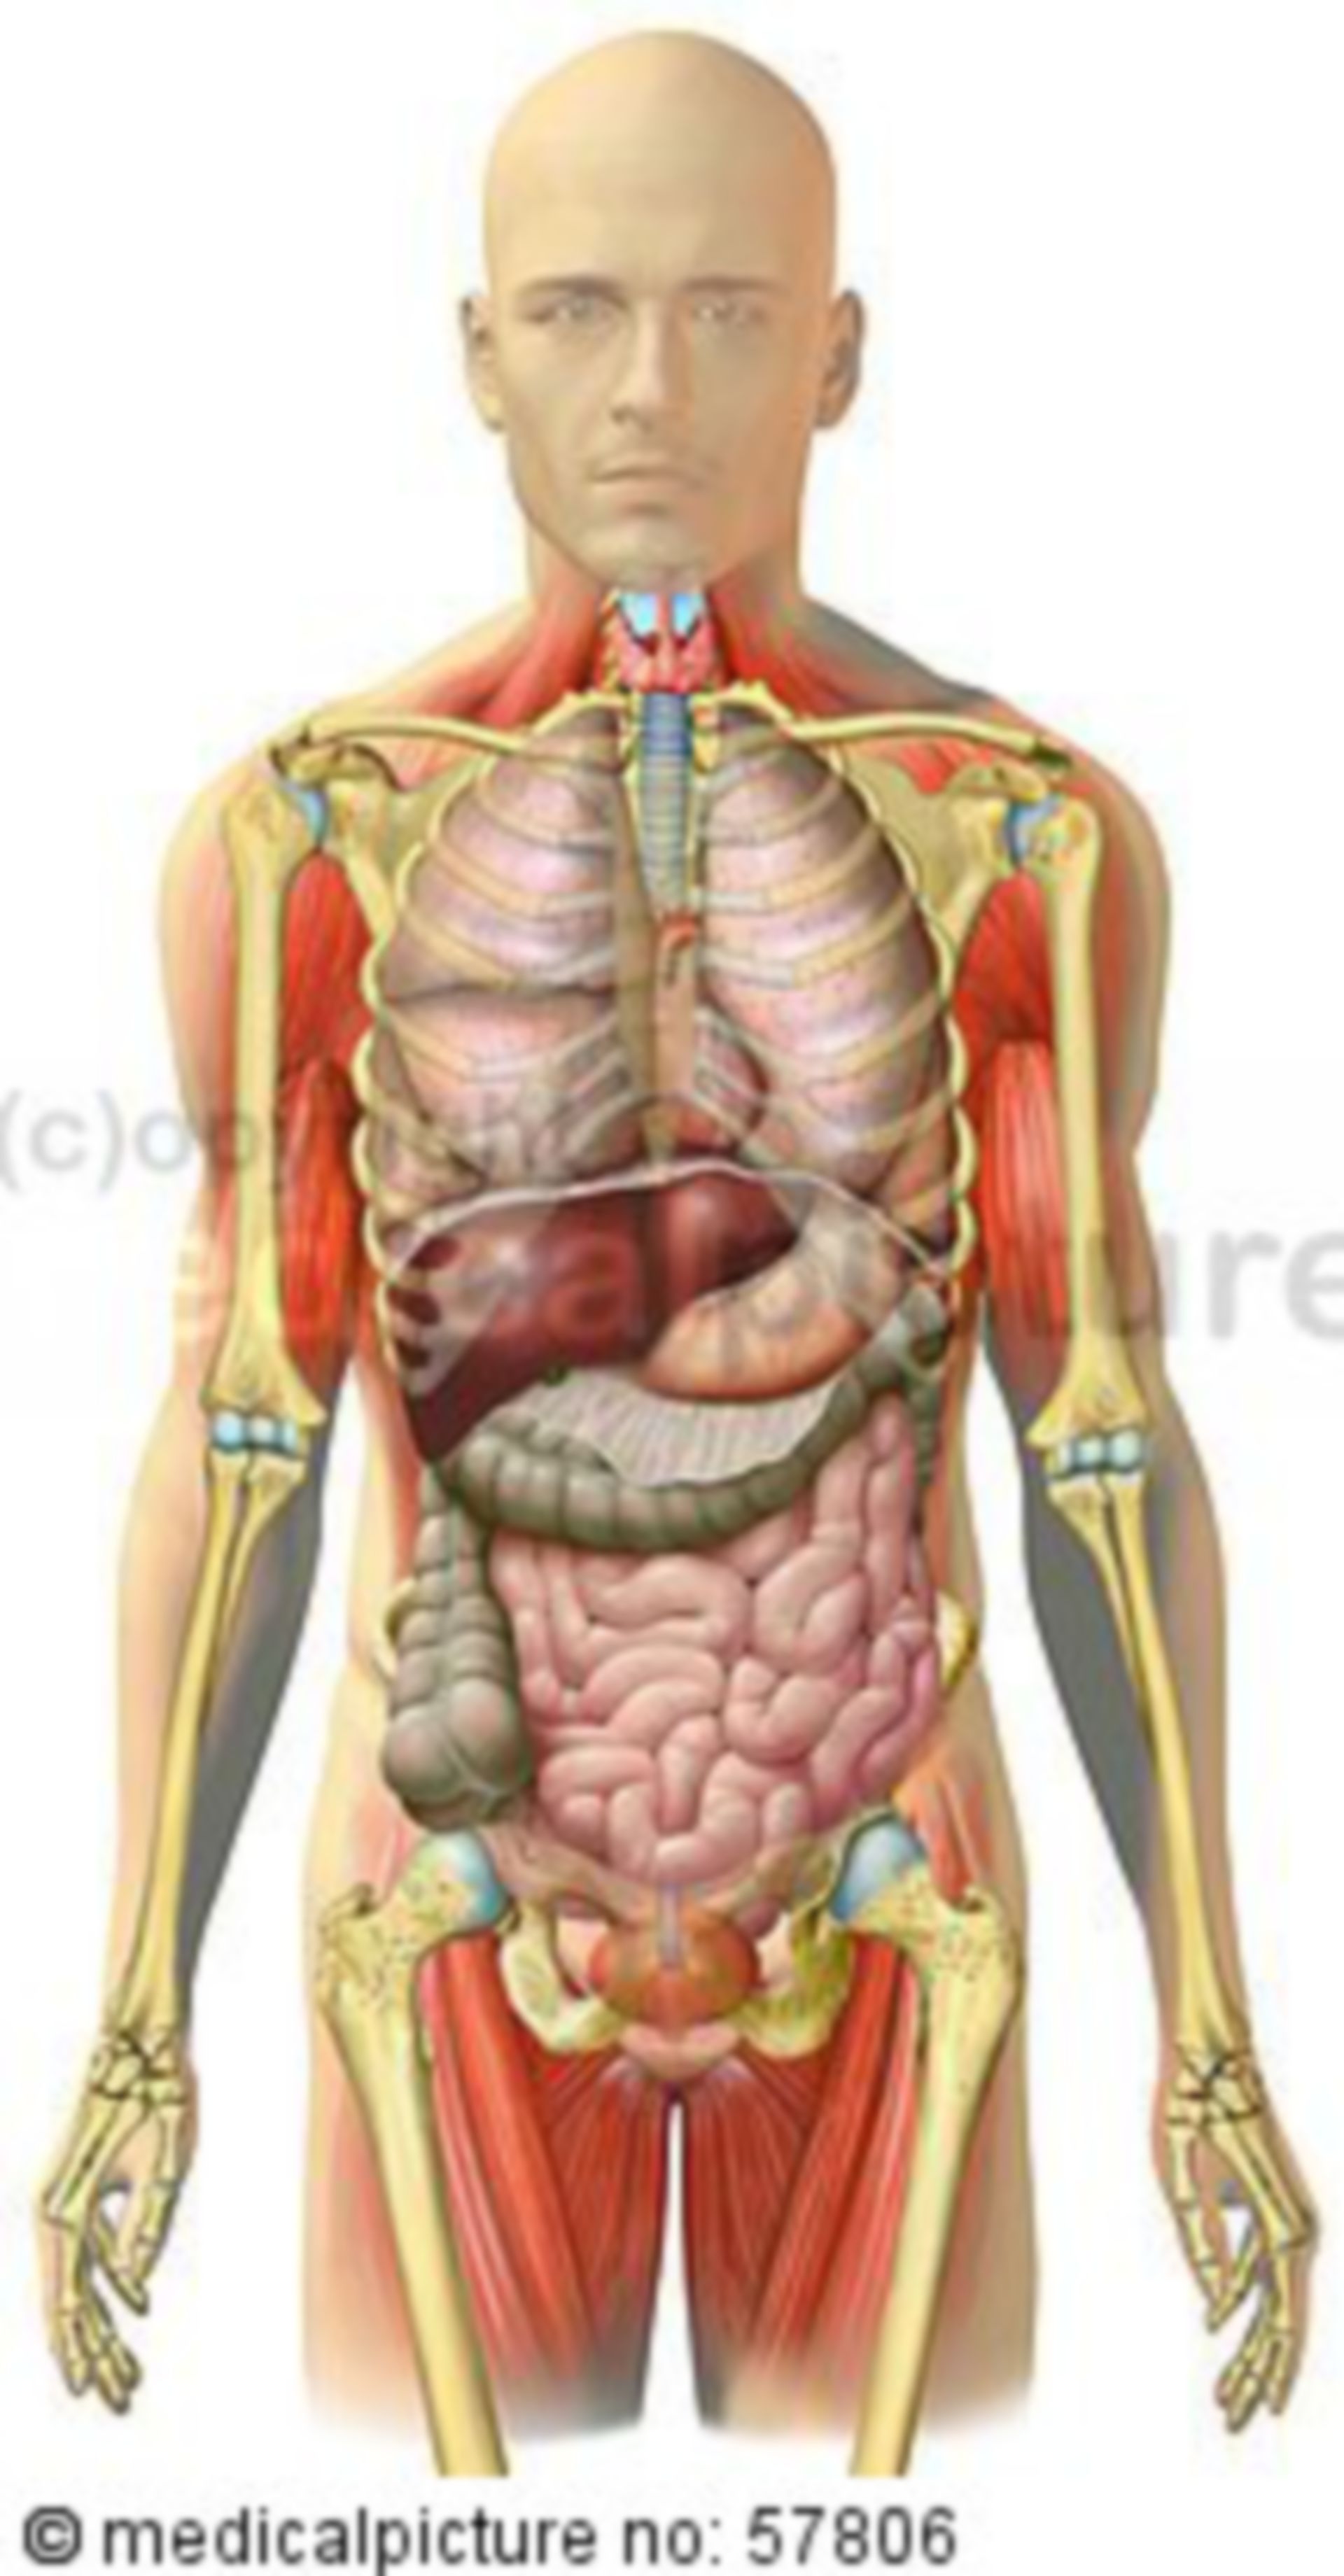 Anatomical Illustrations: Internal Organs of Thorax (transparent), Abdomen, Pelvis, with Skeleton and Skeletal Muscles